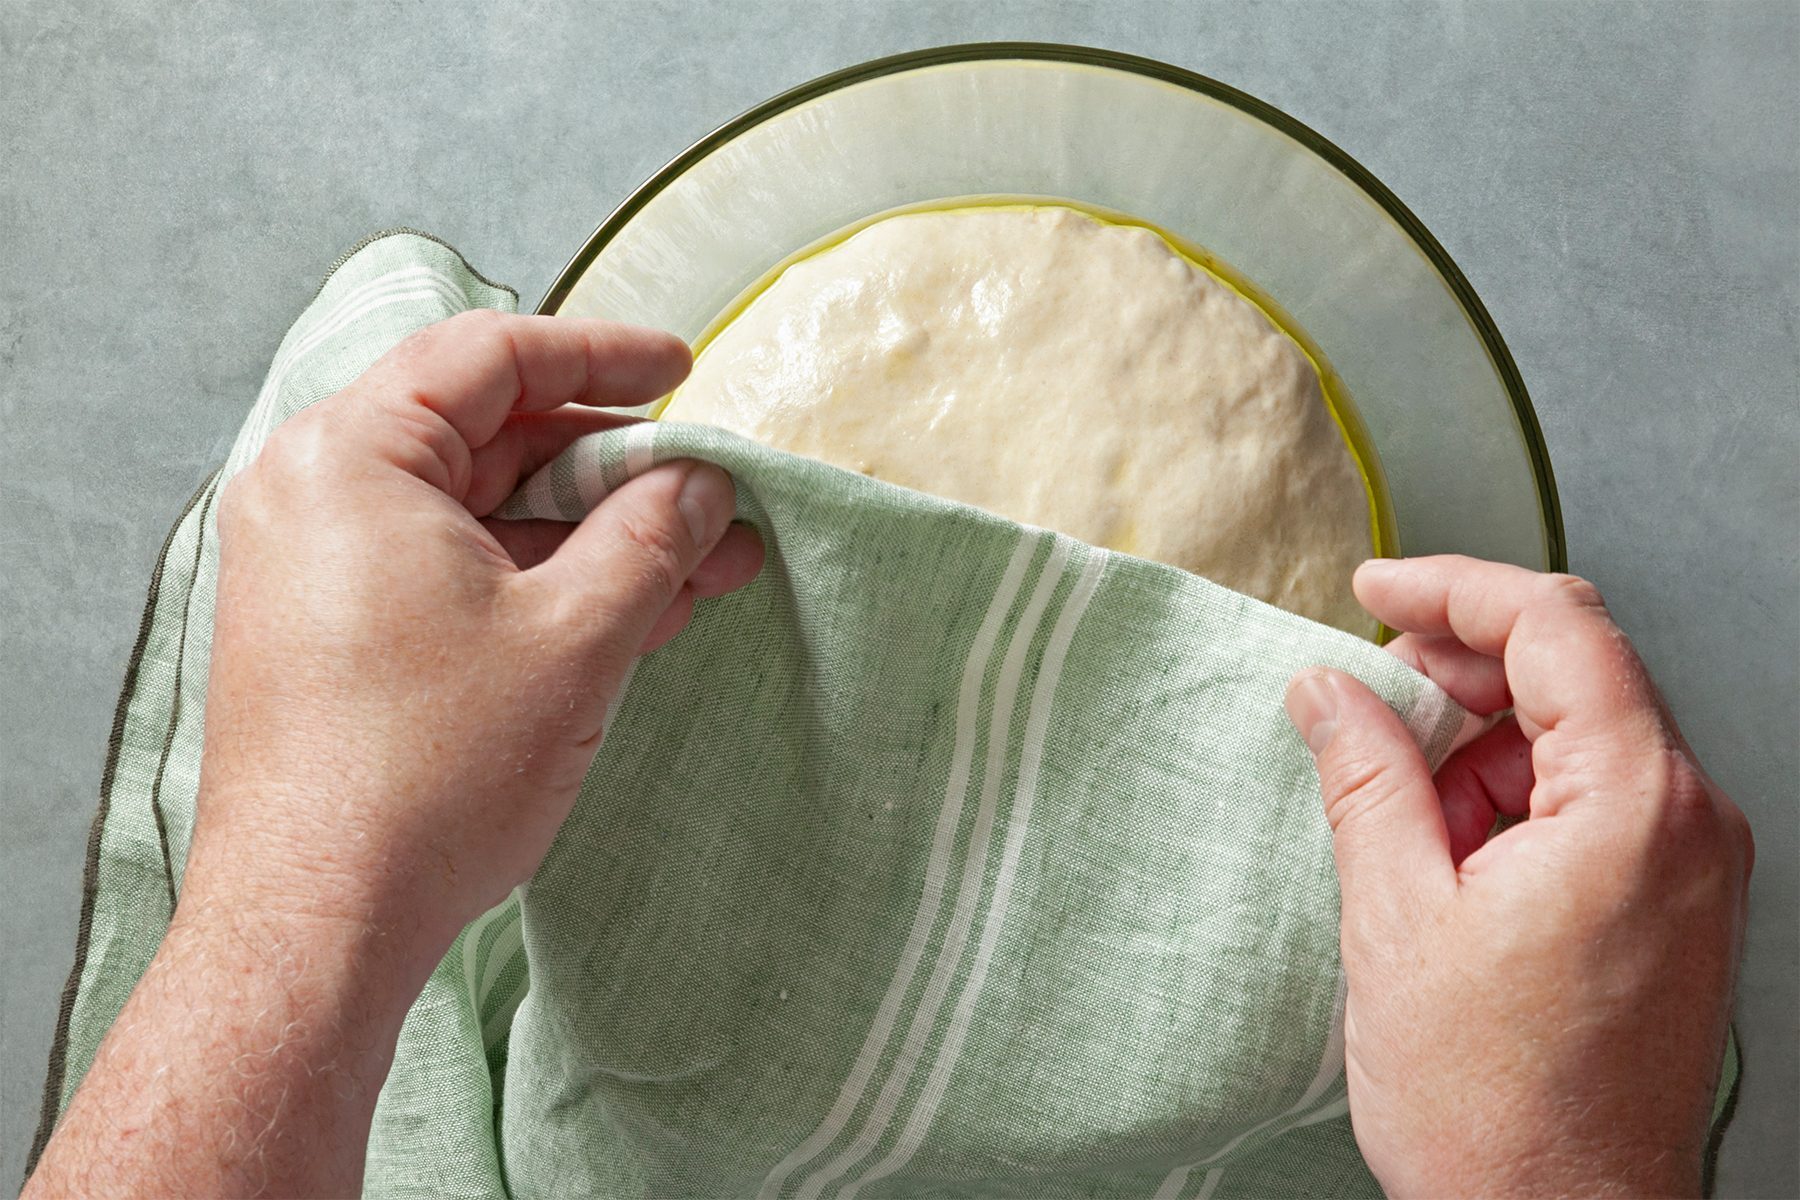 A pair of hands is seen lifting a green cloth to reveal a bowl containing risen dough. The bowl sits on a gray surface, and the dough has a light, smooth texture. 